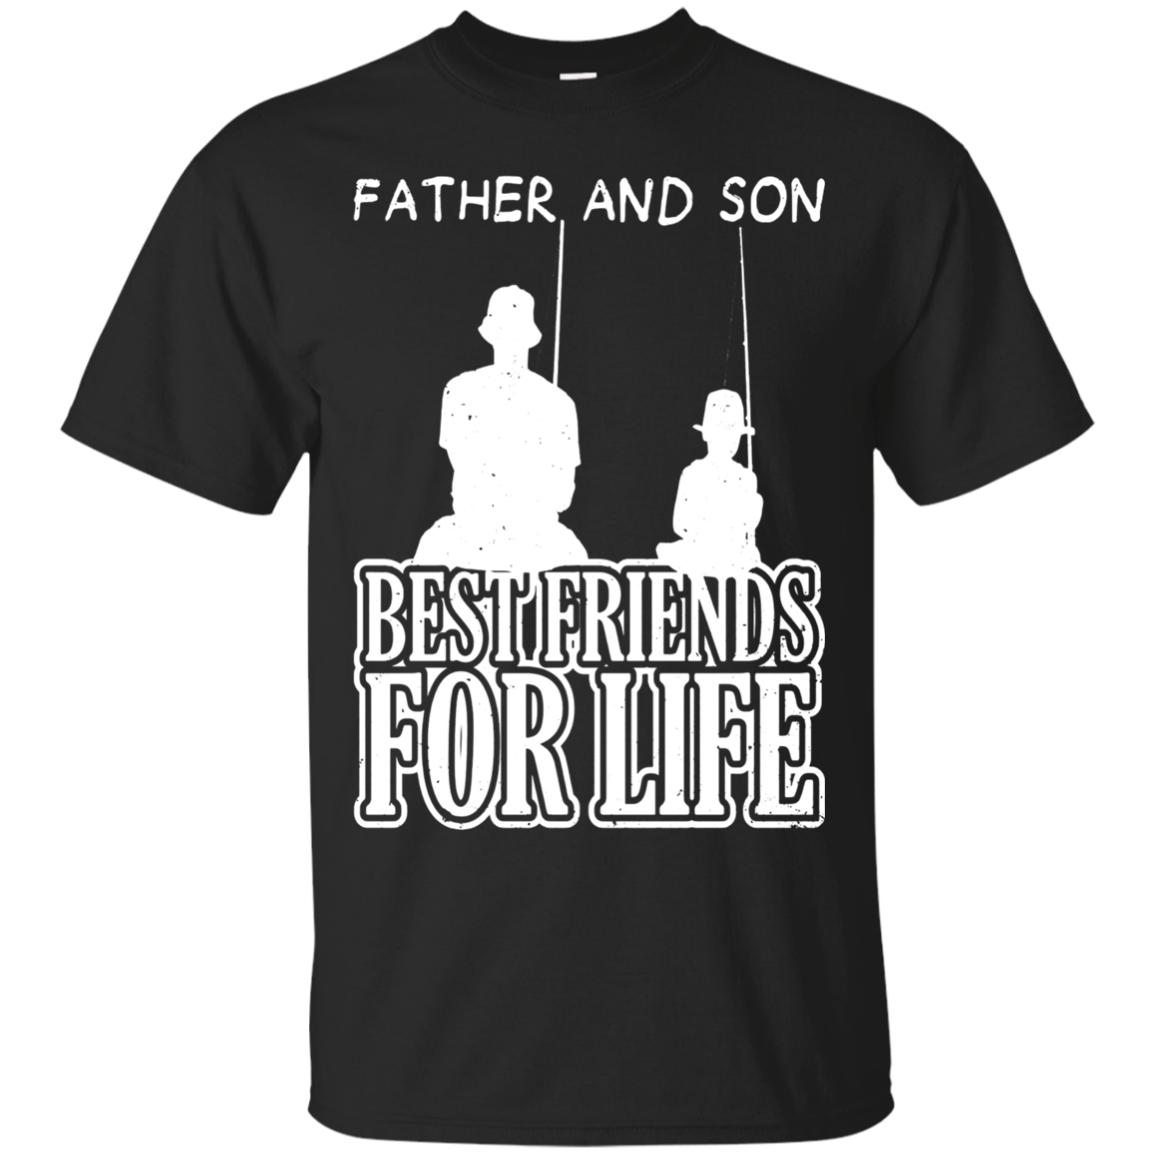 Shop From 1000 Unique Fishing T Shirt Father And Son Best Friends For Life